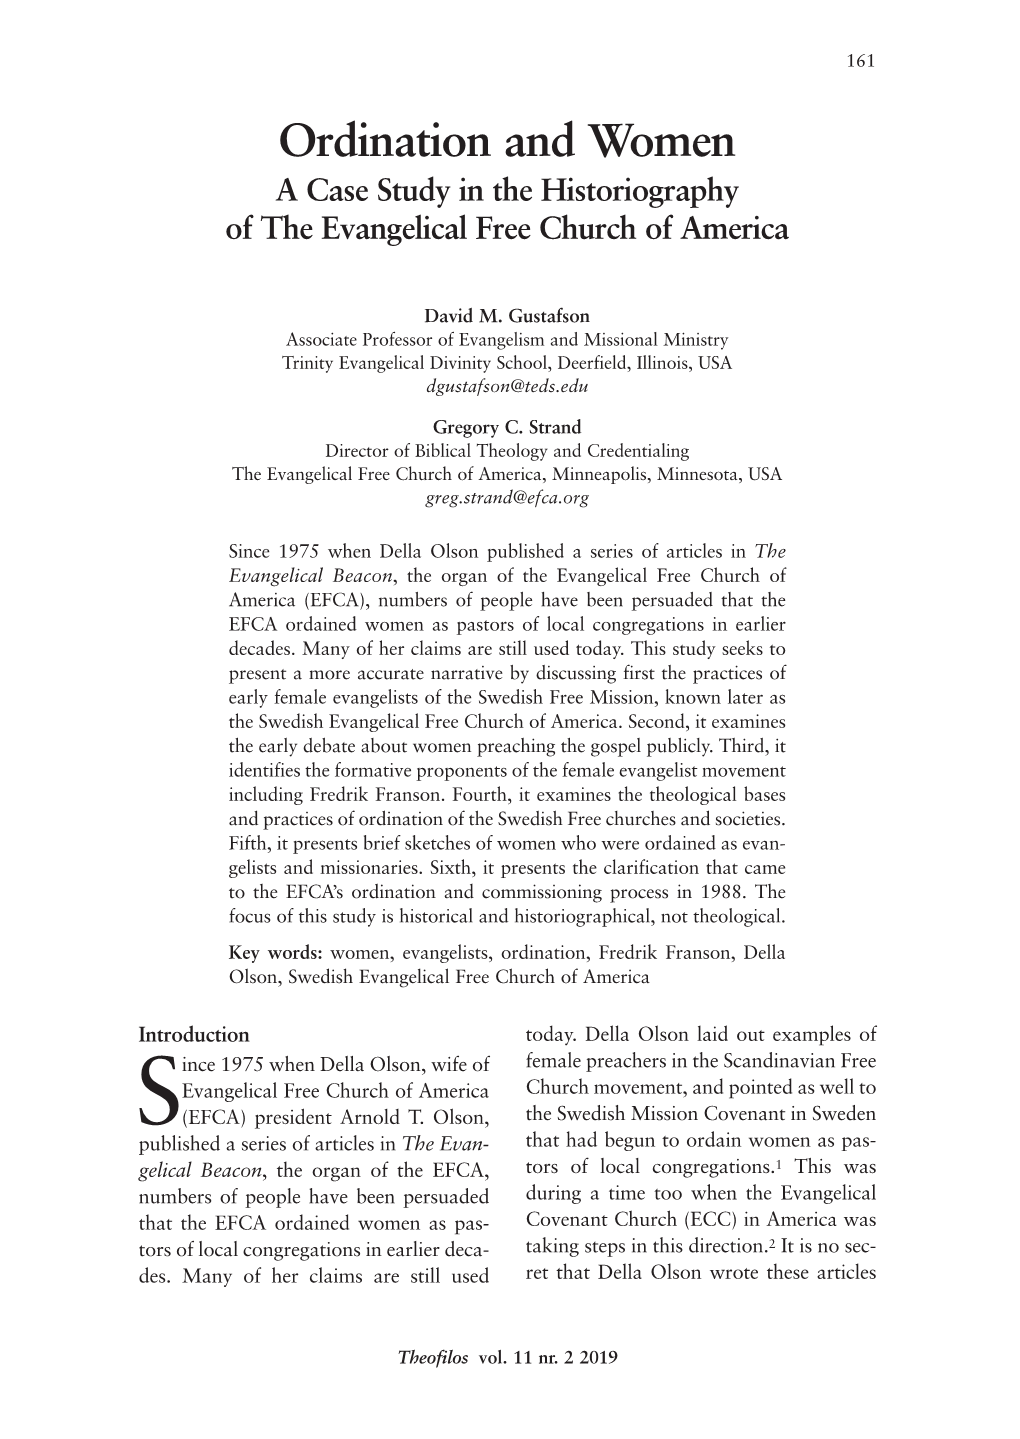 Ordination and Women a Case Study in the Historiography of the Evangelical Free Church of America